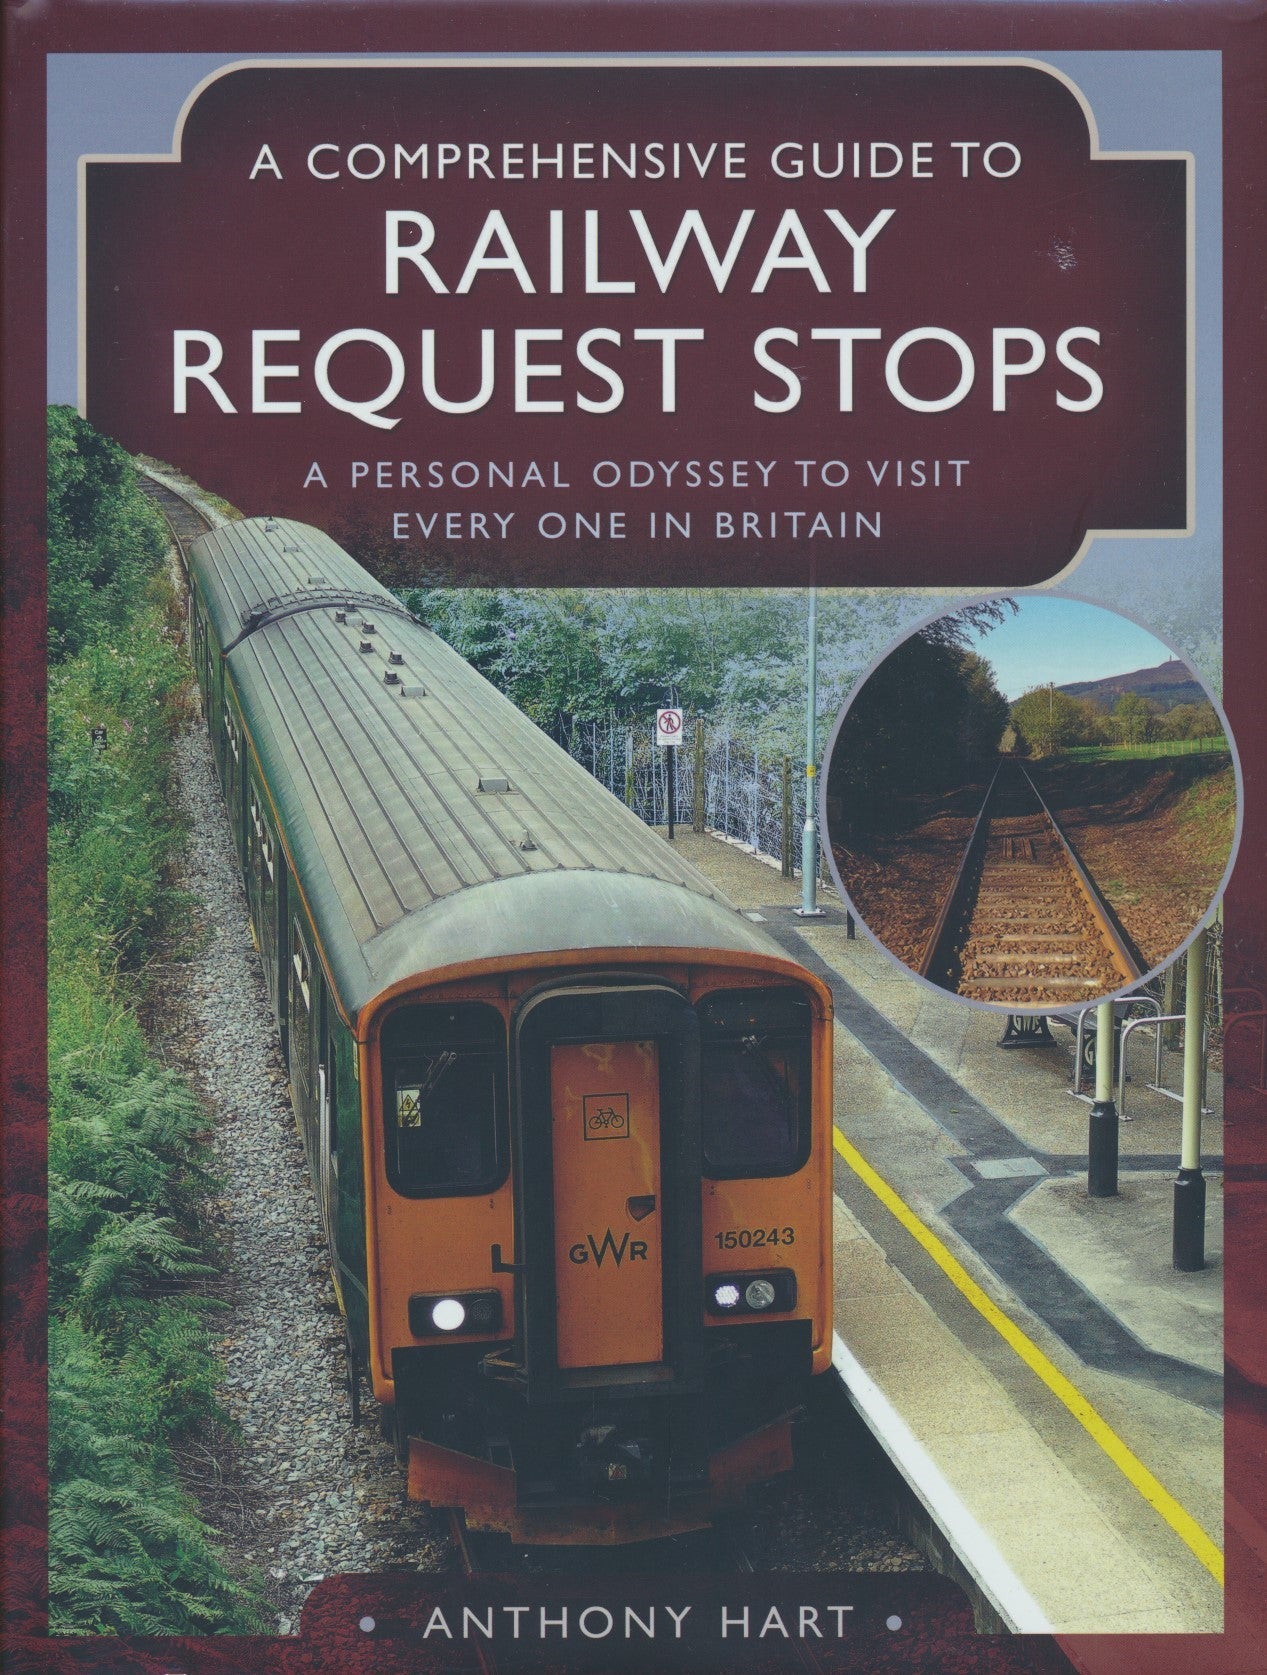 A Comprehensive Guide to Railway Request Stops